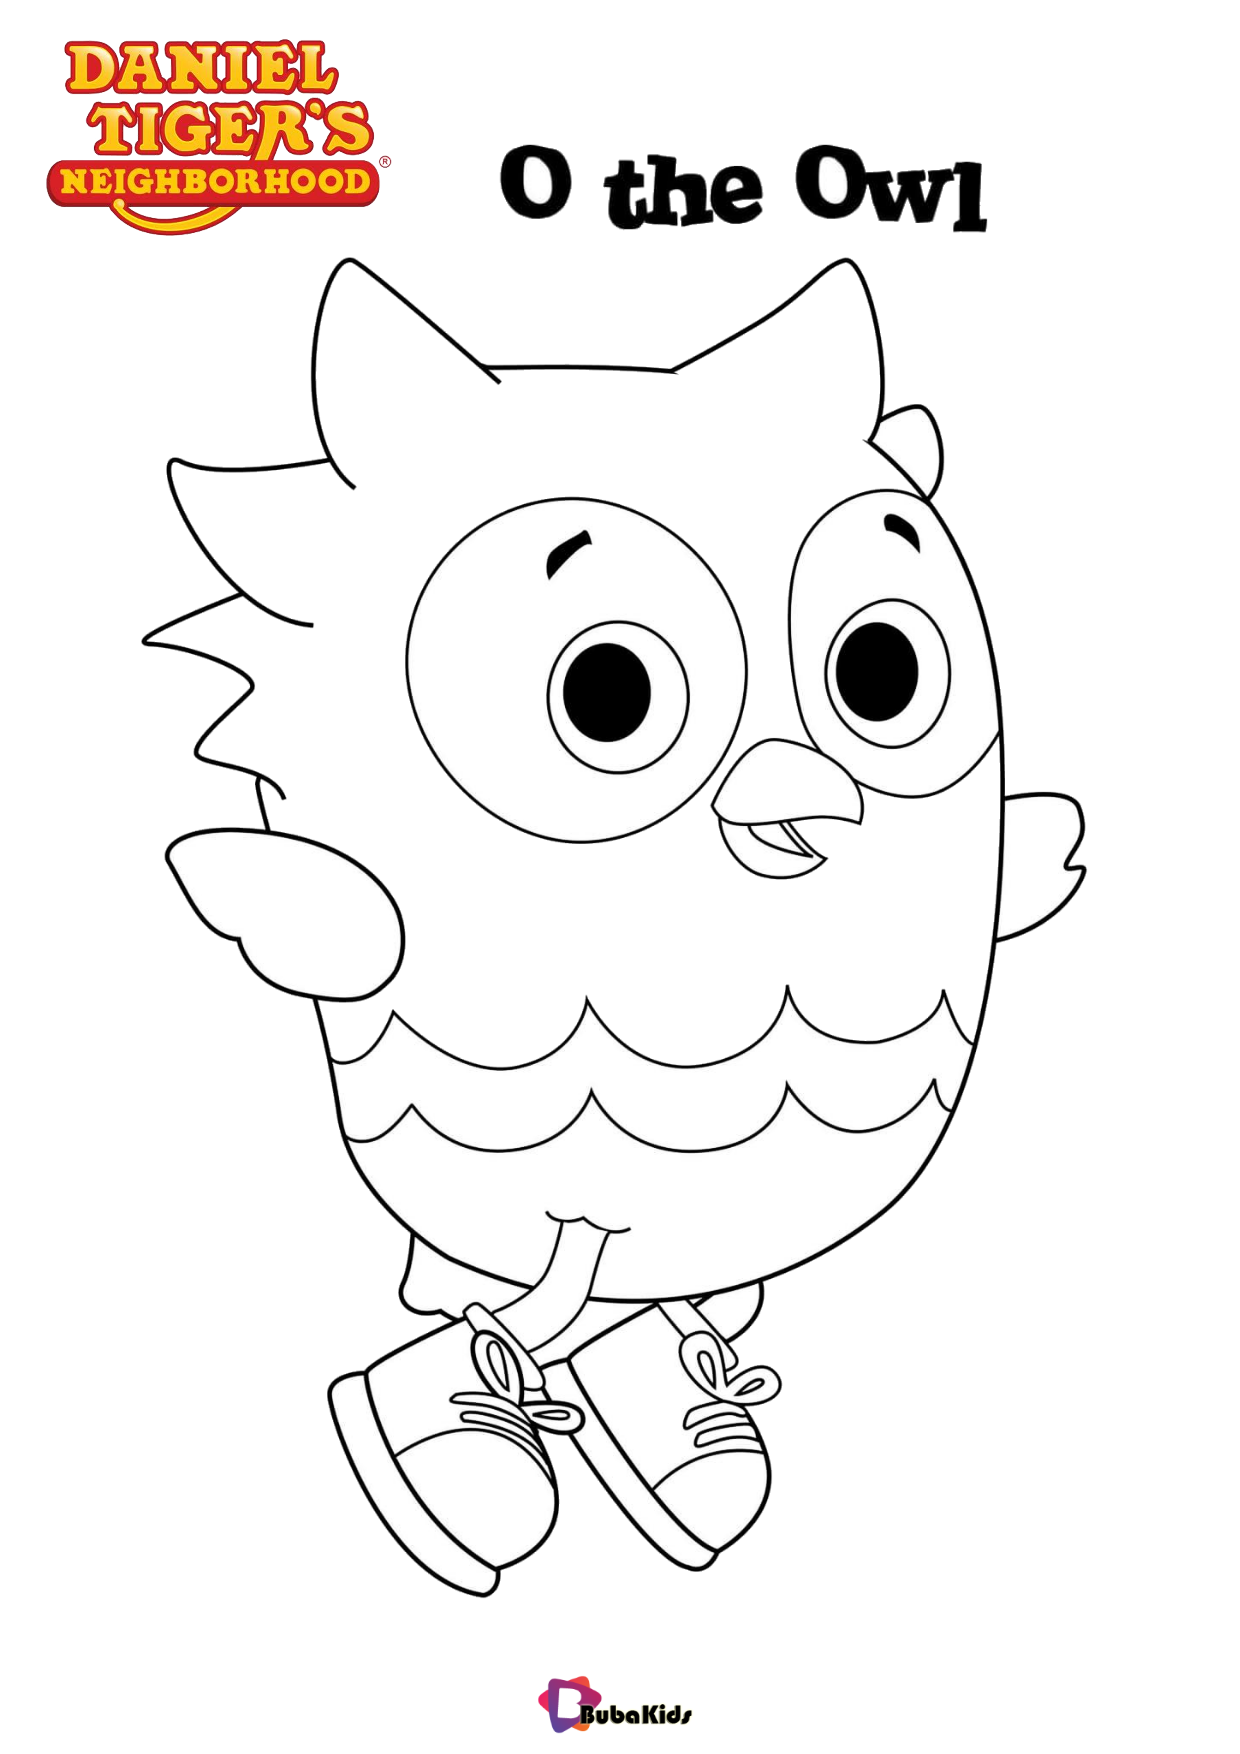 O the owl character from tv series Daniel Tiger’s Neighborhood coloring page Wallpaper